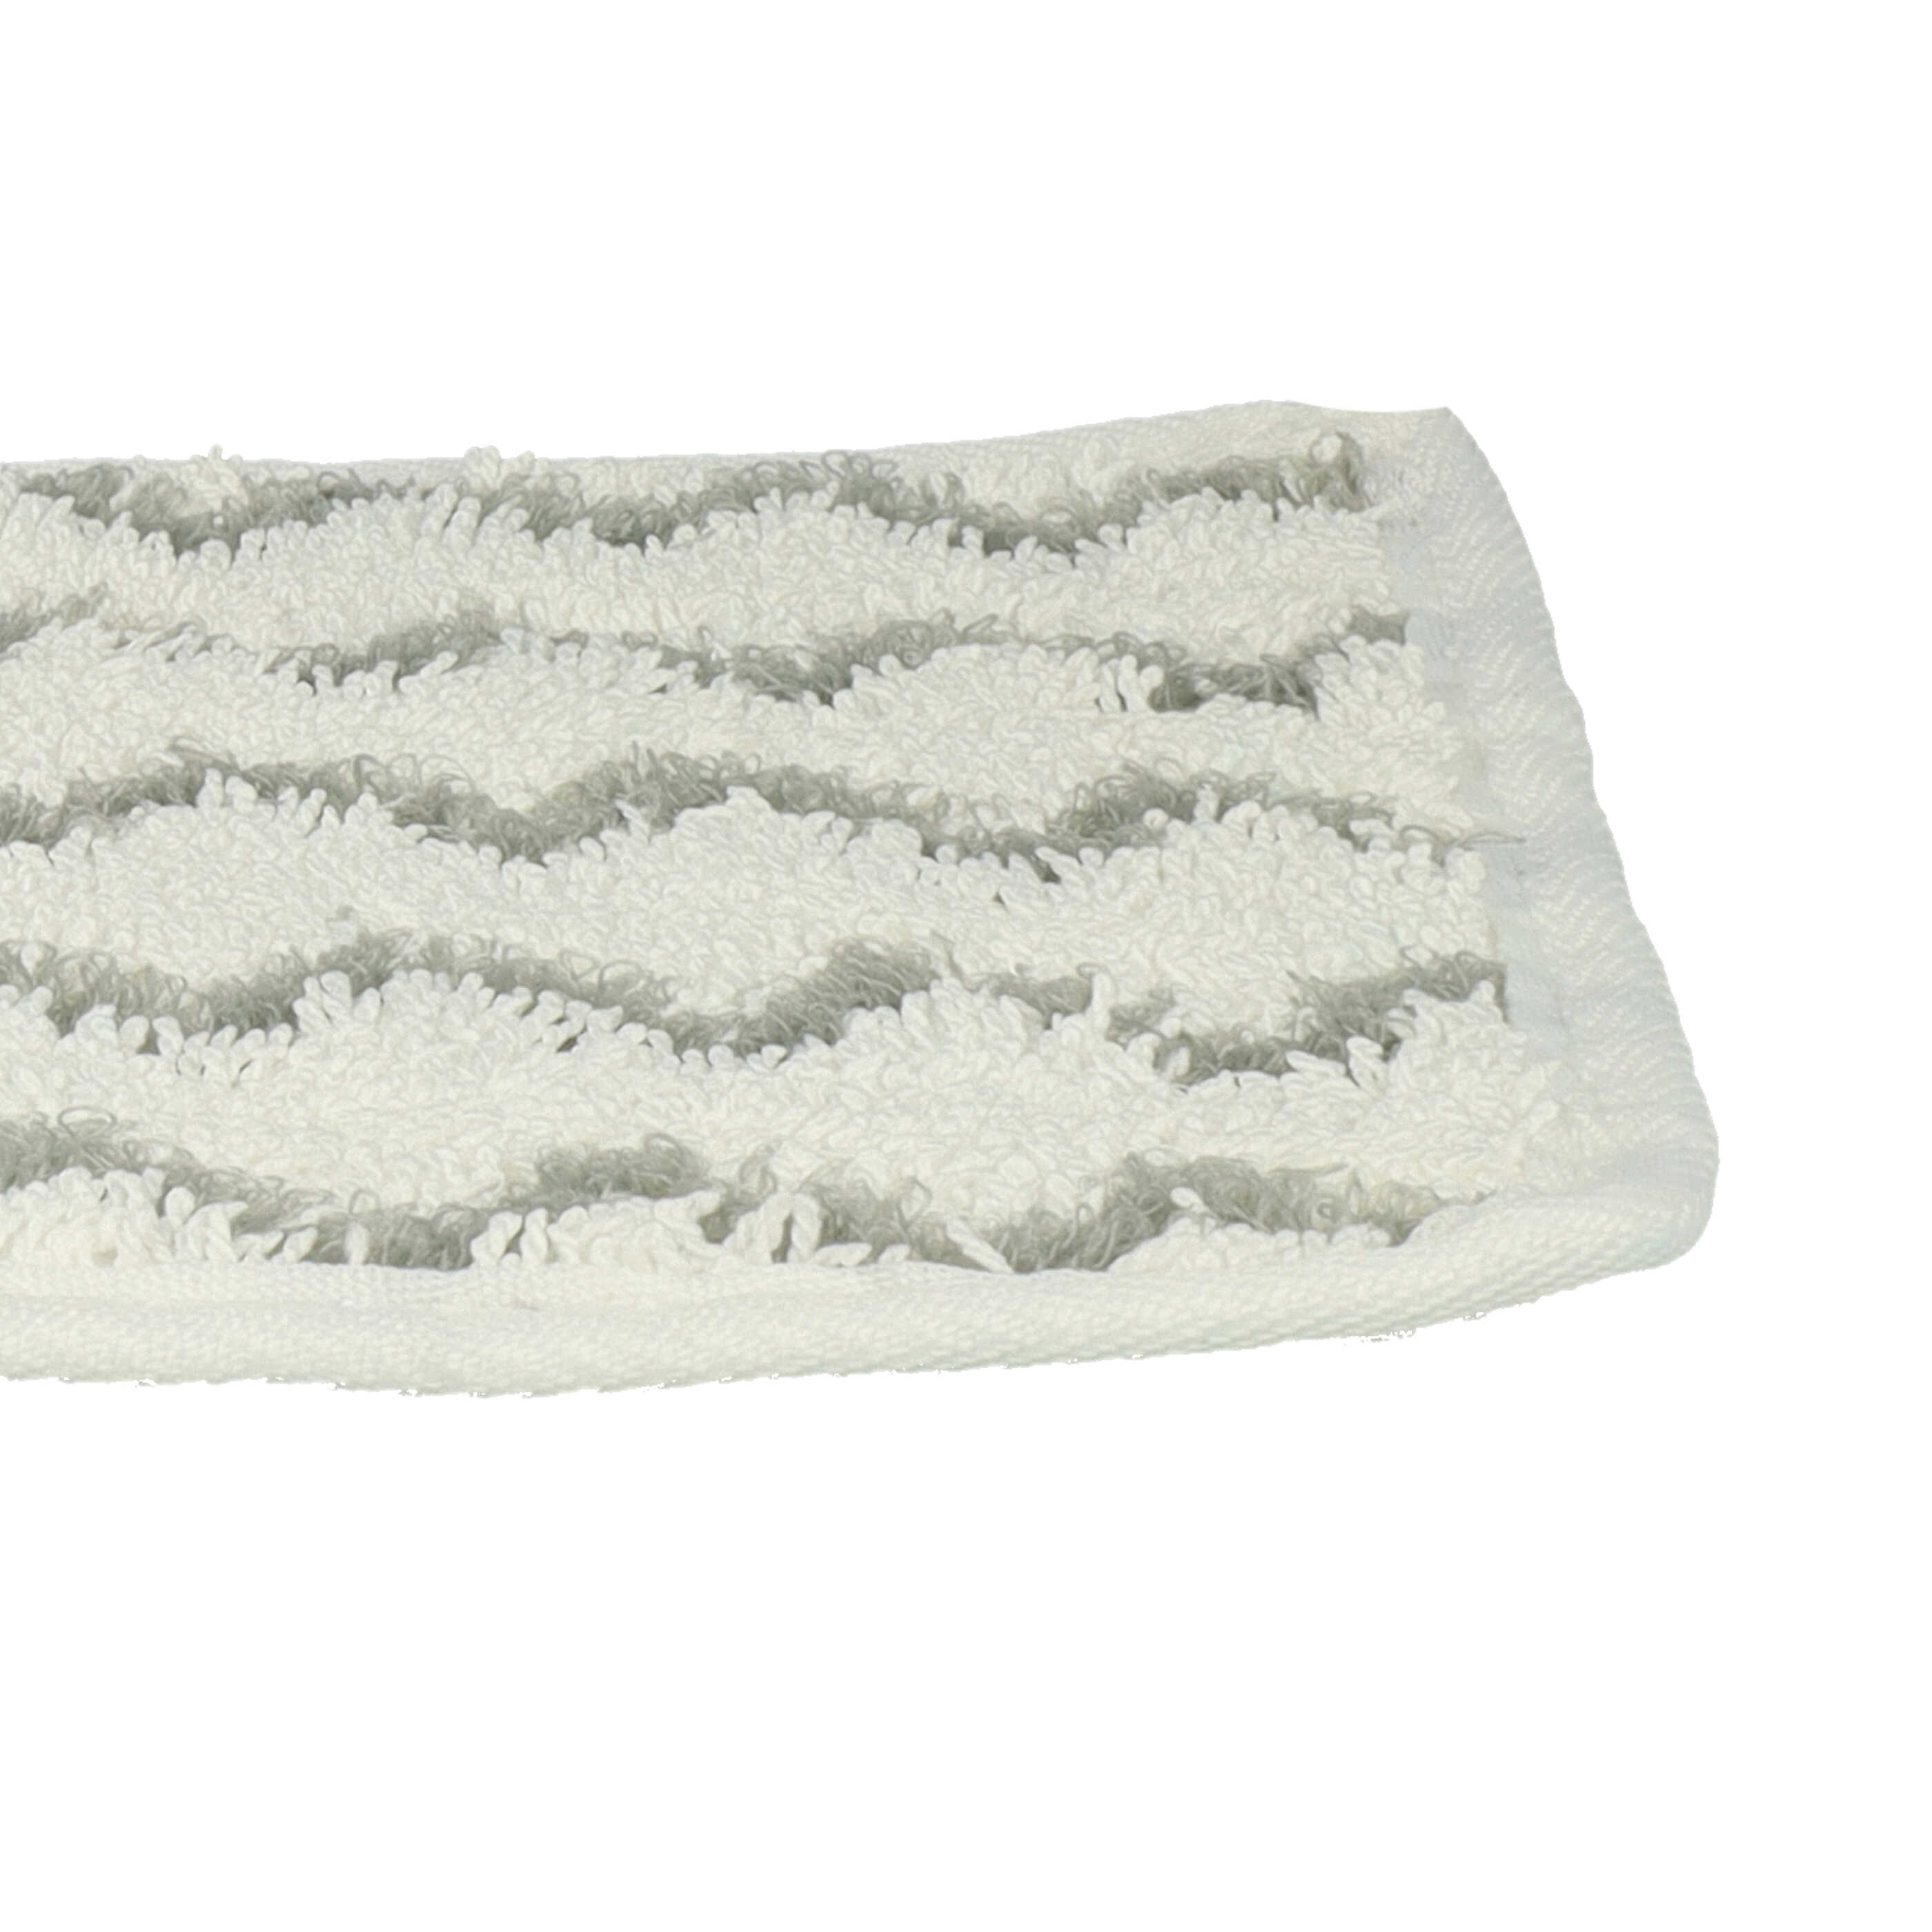 Cleaning Pad replaces Vileda 161717 for ViledaHot Spray Steamer, Steam Mop - Microfibre Grey White